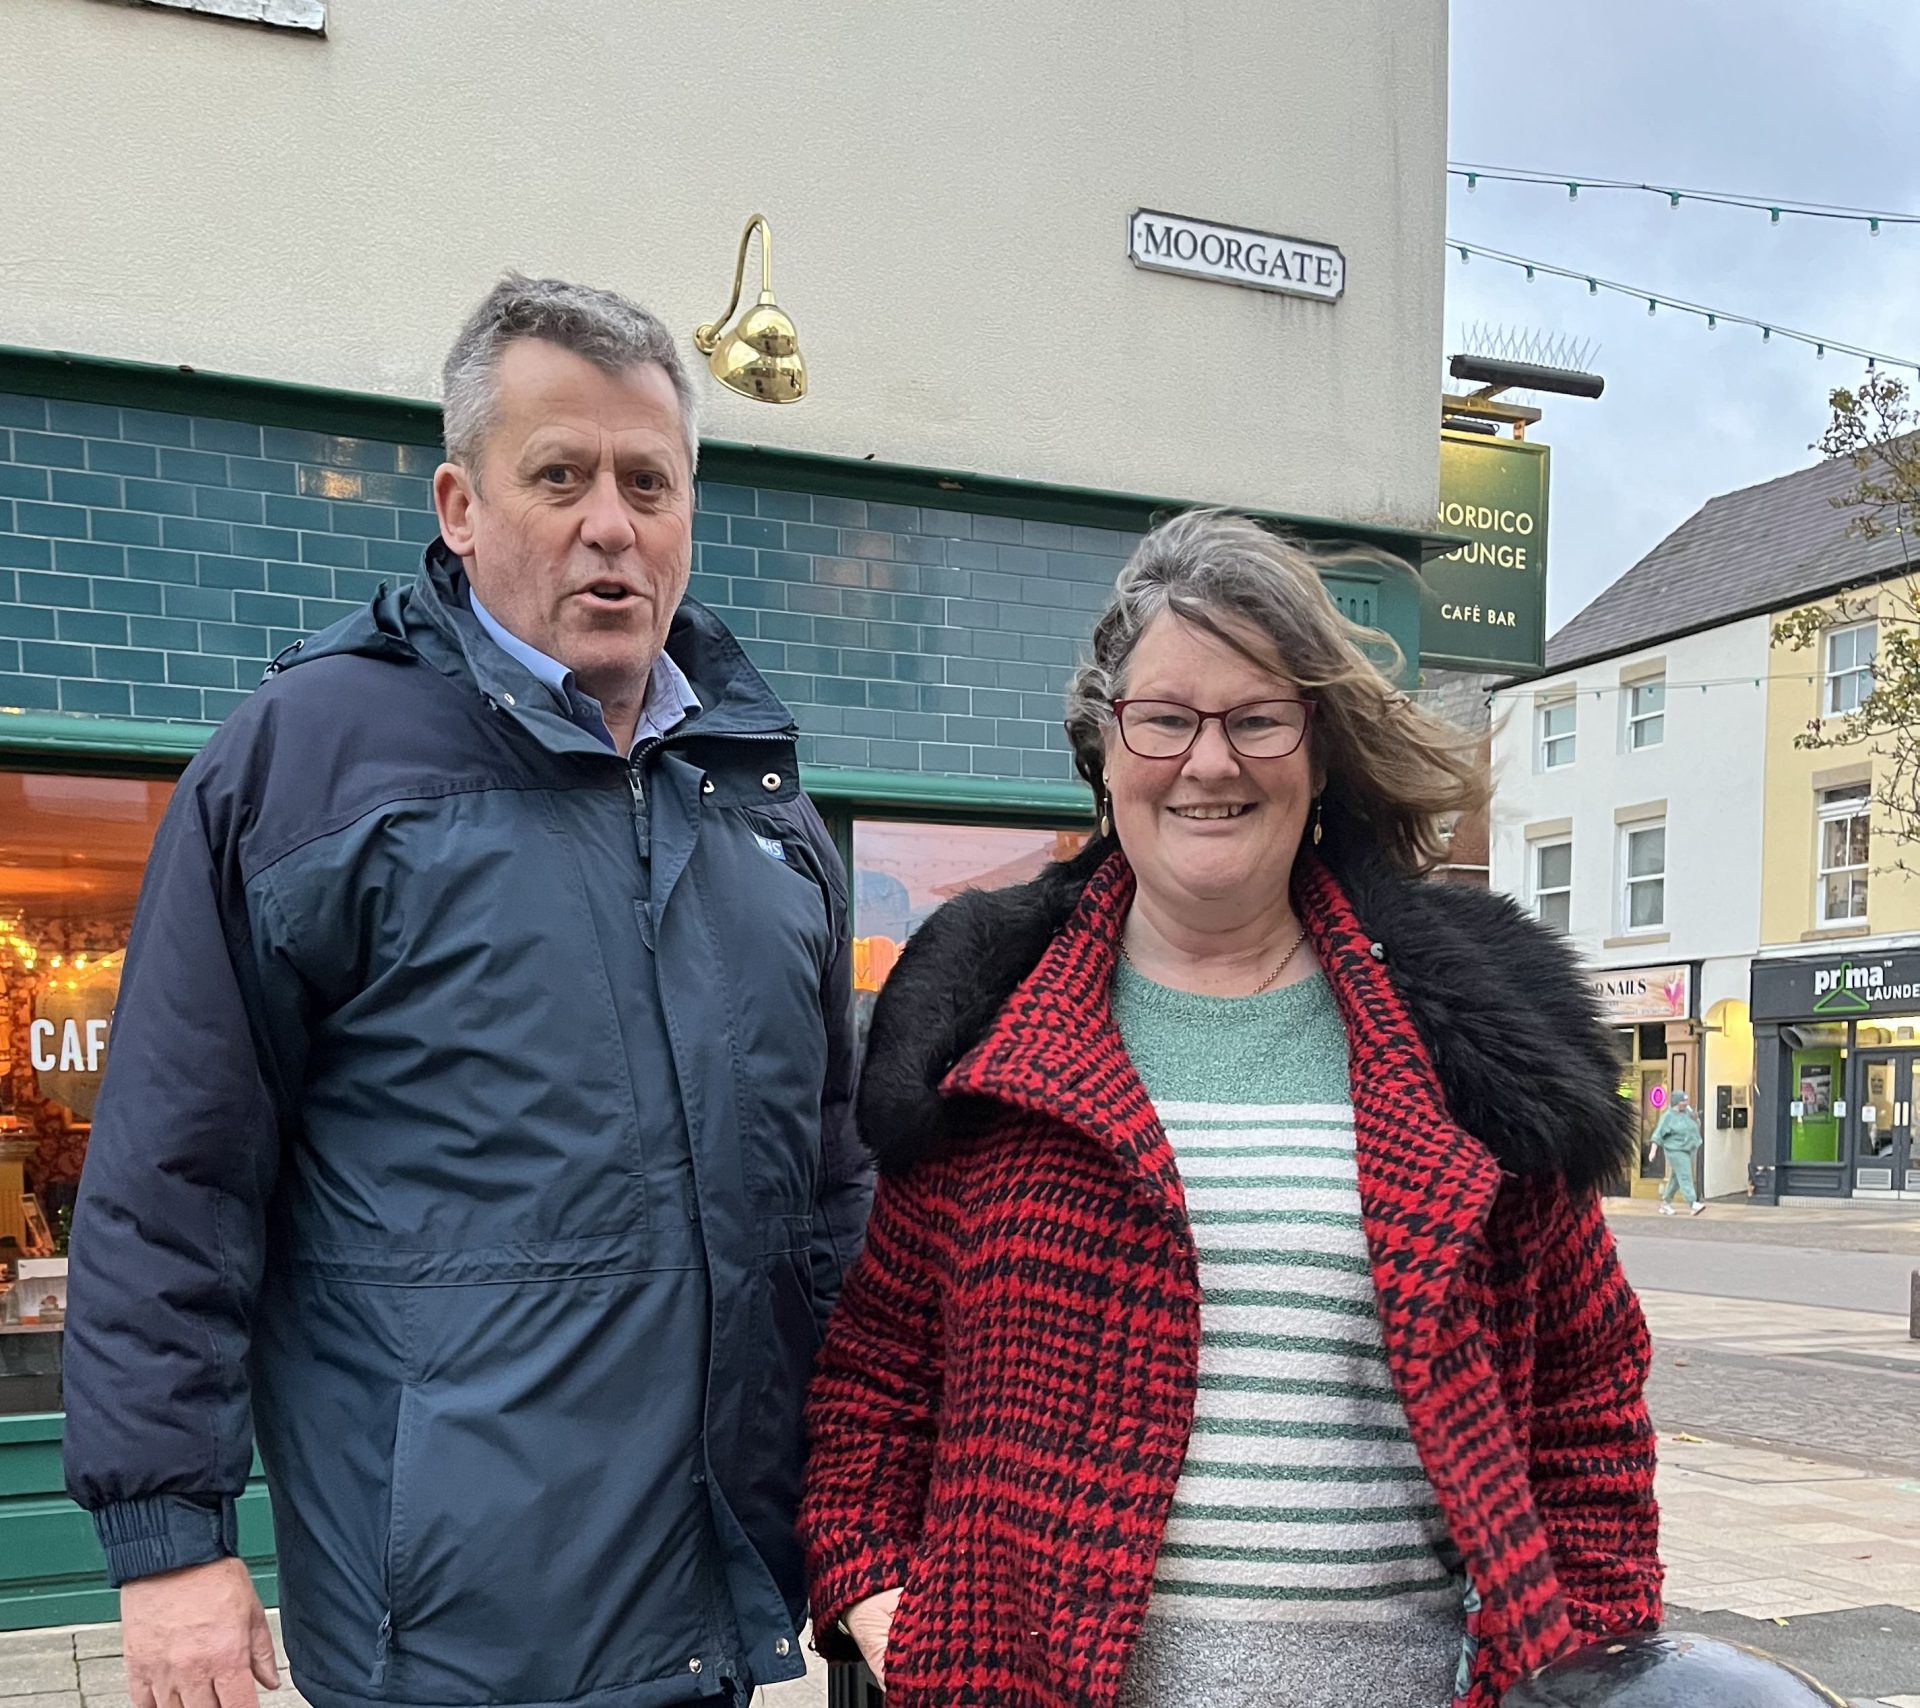 Gordon and Janet in the town centre